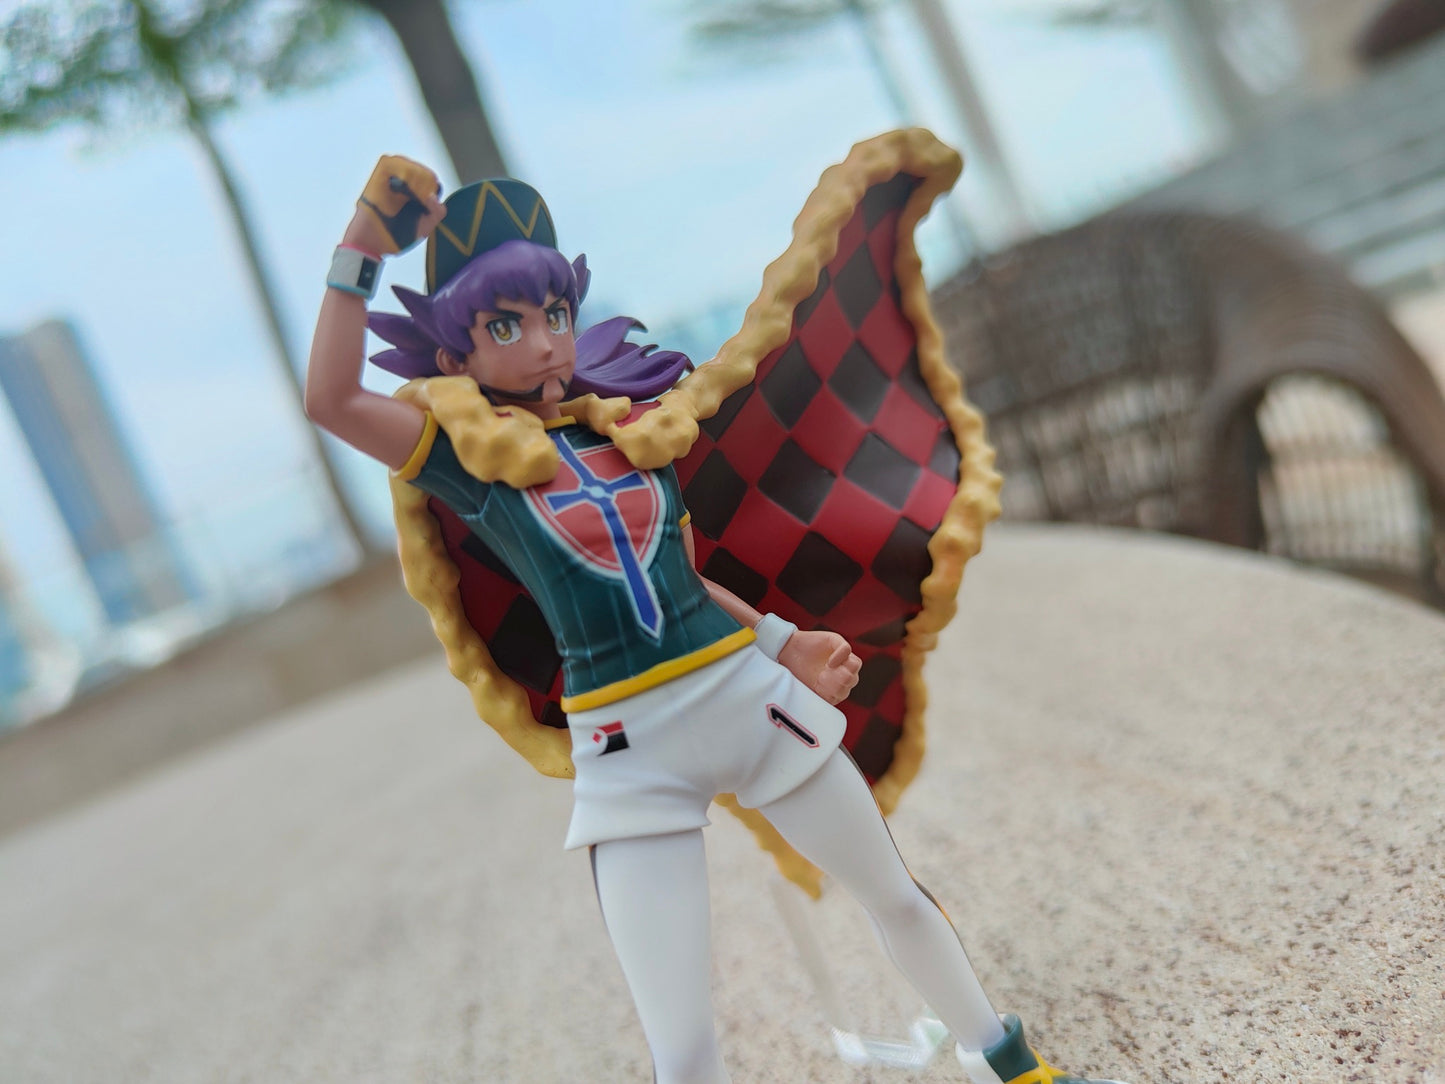 [IN STOCK] 1/20 Scale World Figure [TRAINER HOUSE] - Leon